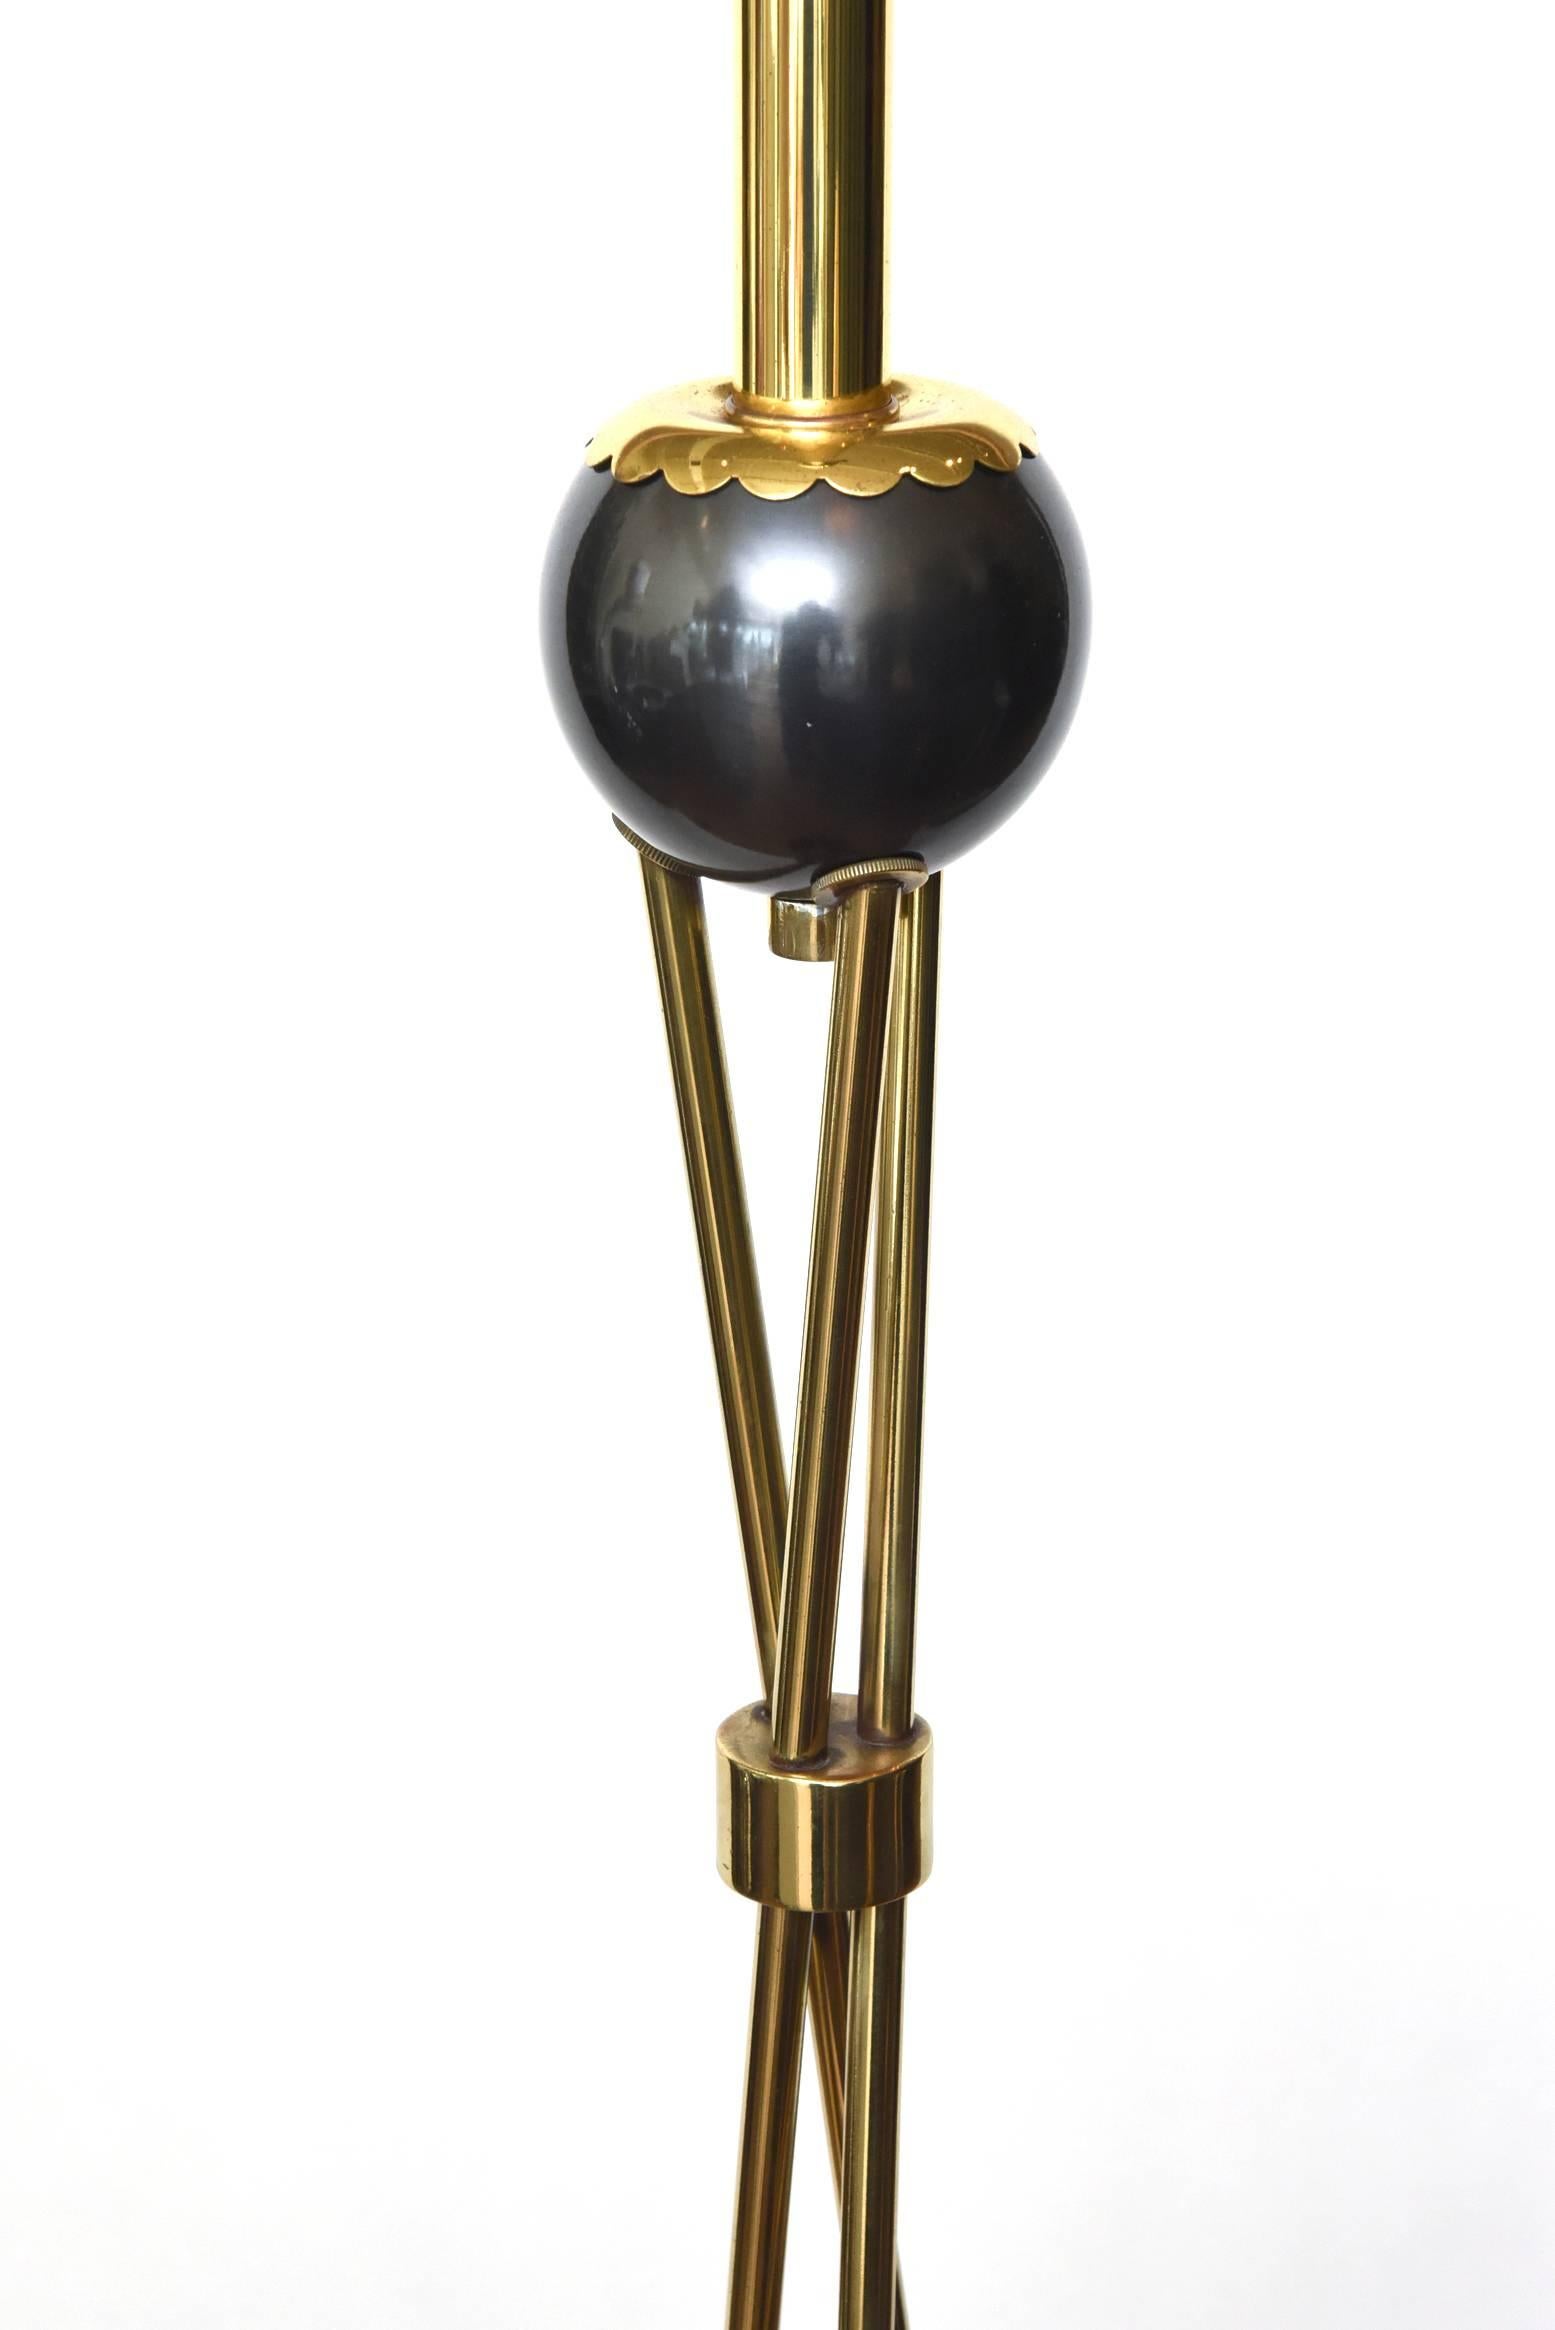 This vintage and fully restored Mid-Century Modern floor lamp is a combination of polished brass and gunmetal. It has been rewired and just needs a great drum shade at your end with a glass bowl. It is modern yet midcentury. It looks French yet is